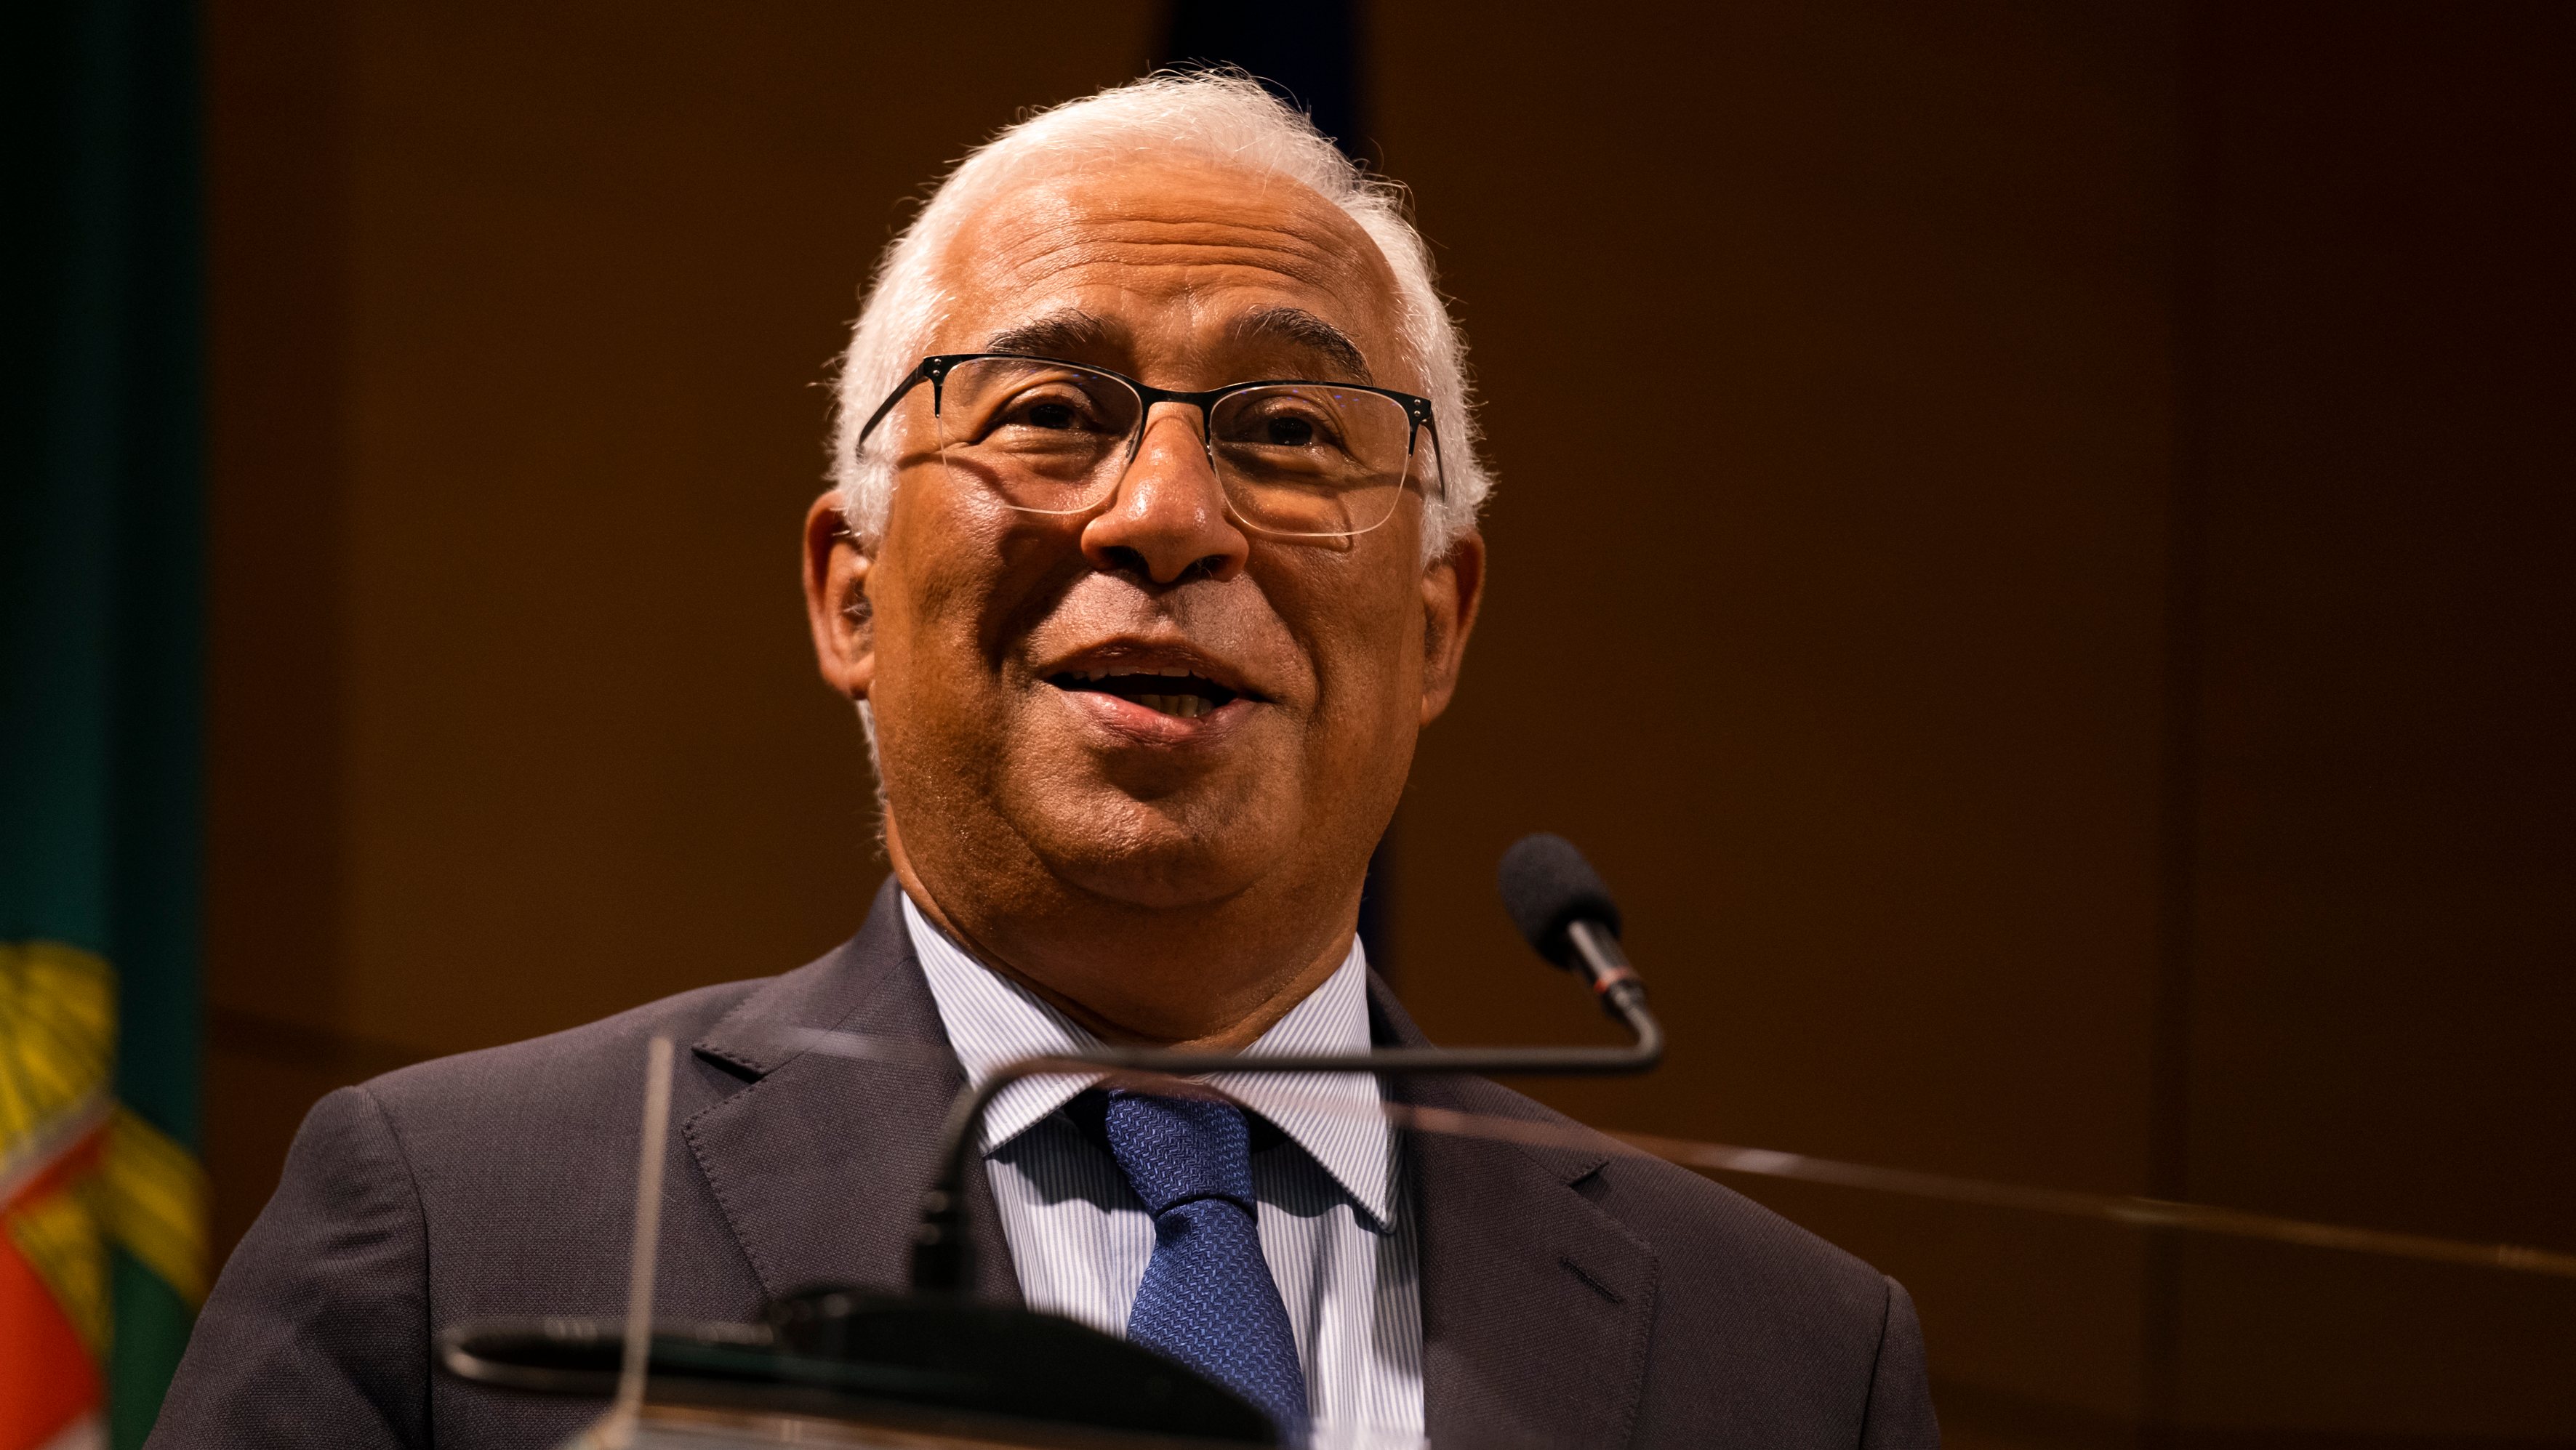 Prime Minister Antonio Costa At The Ceremony Of The New Inspectors Of The Judiciary Police